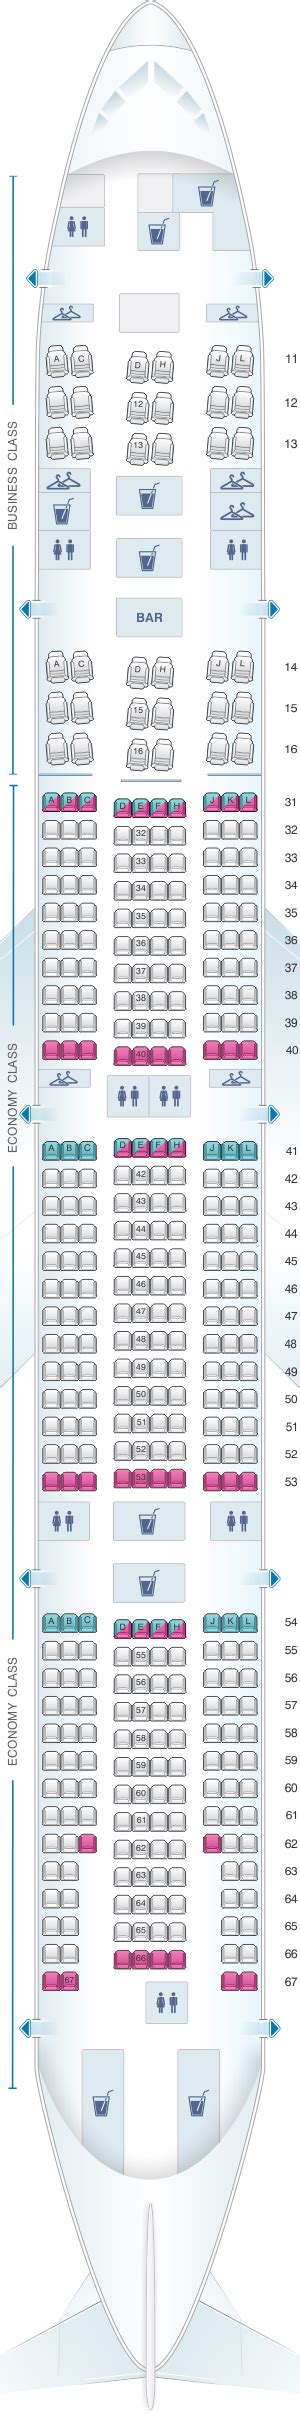 Air China Boeing Seating Chart My Xxx Hot Girl